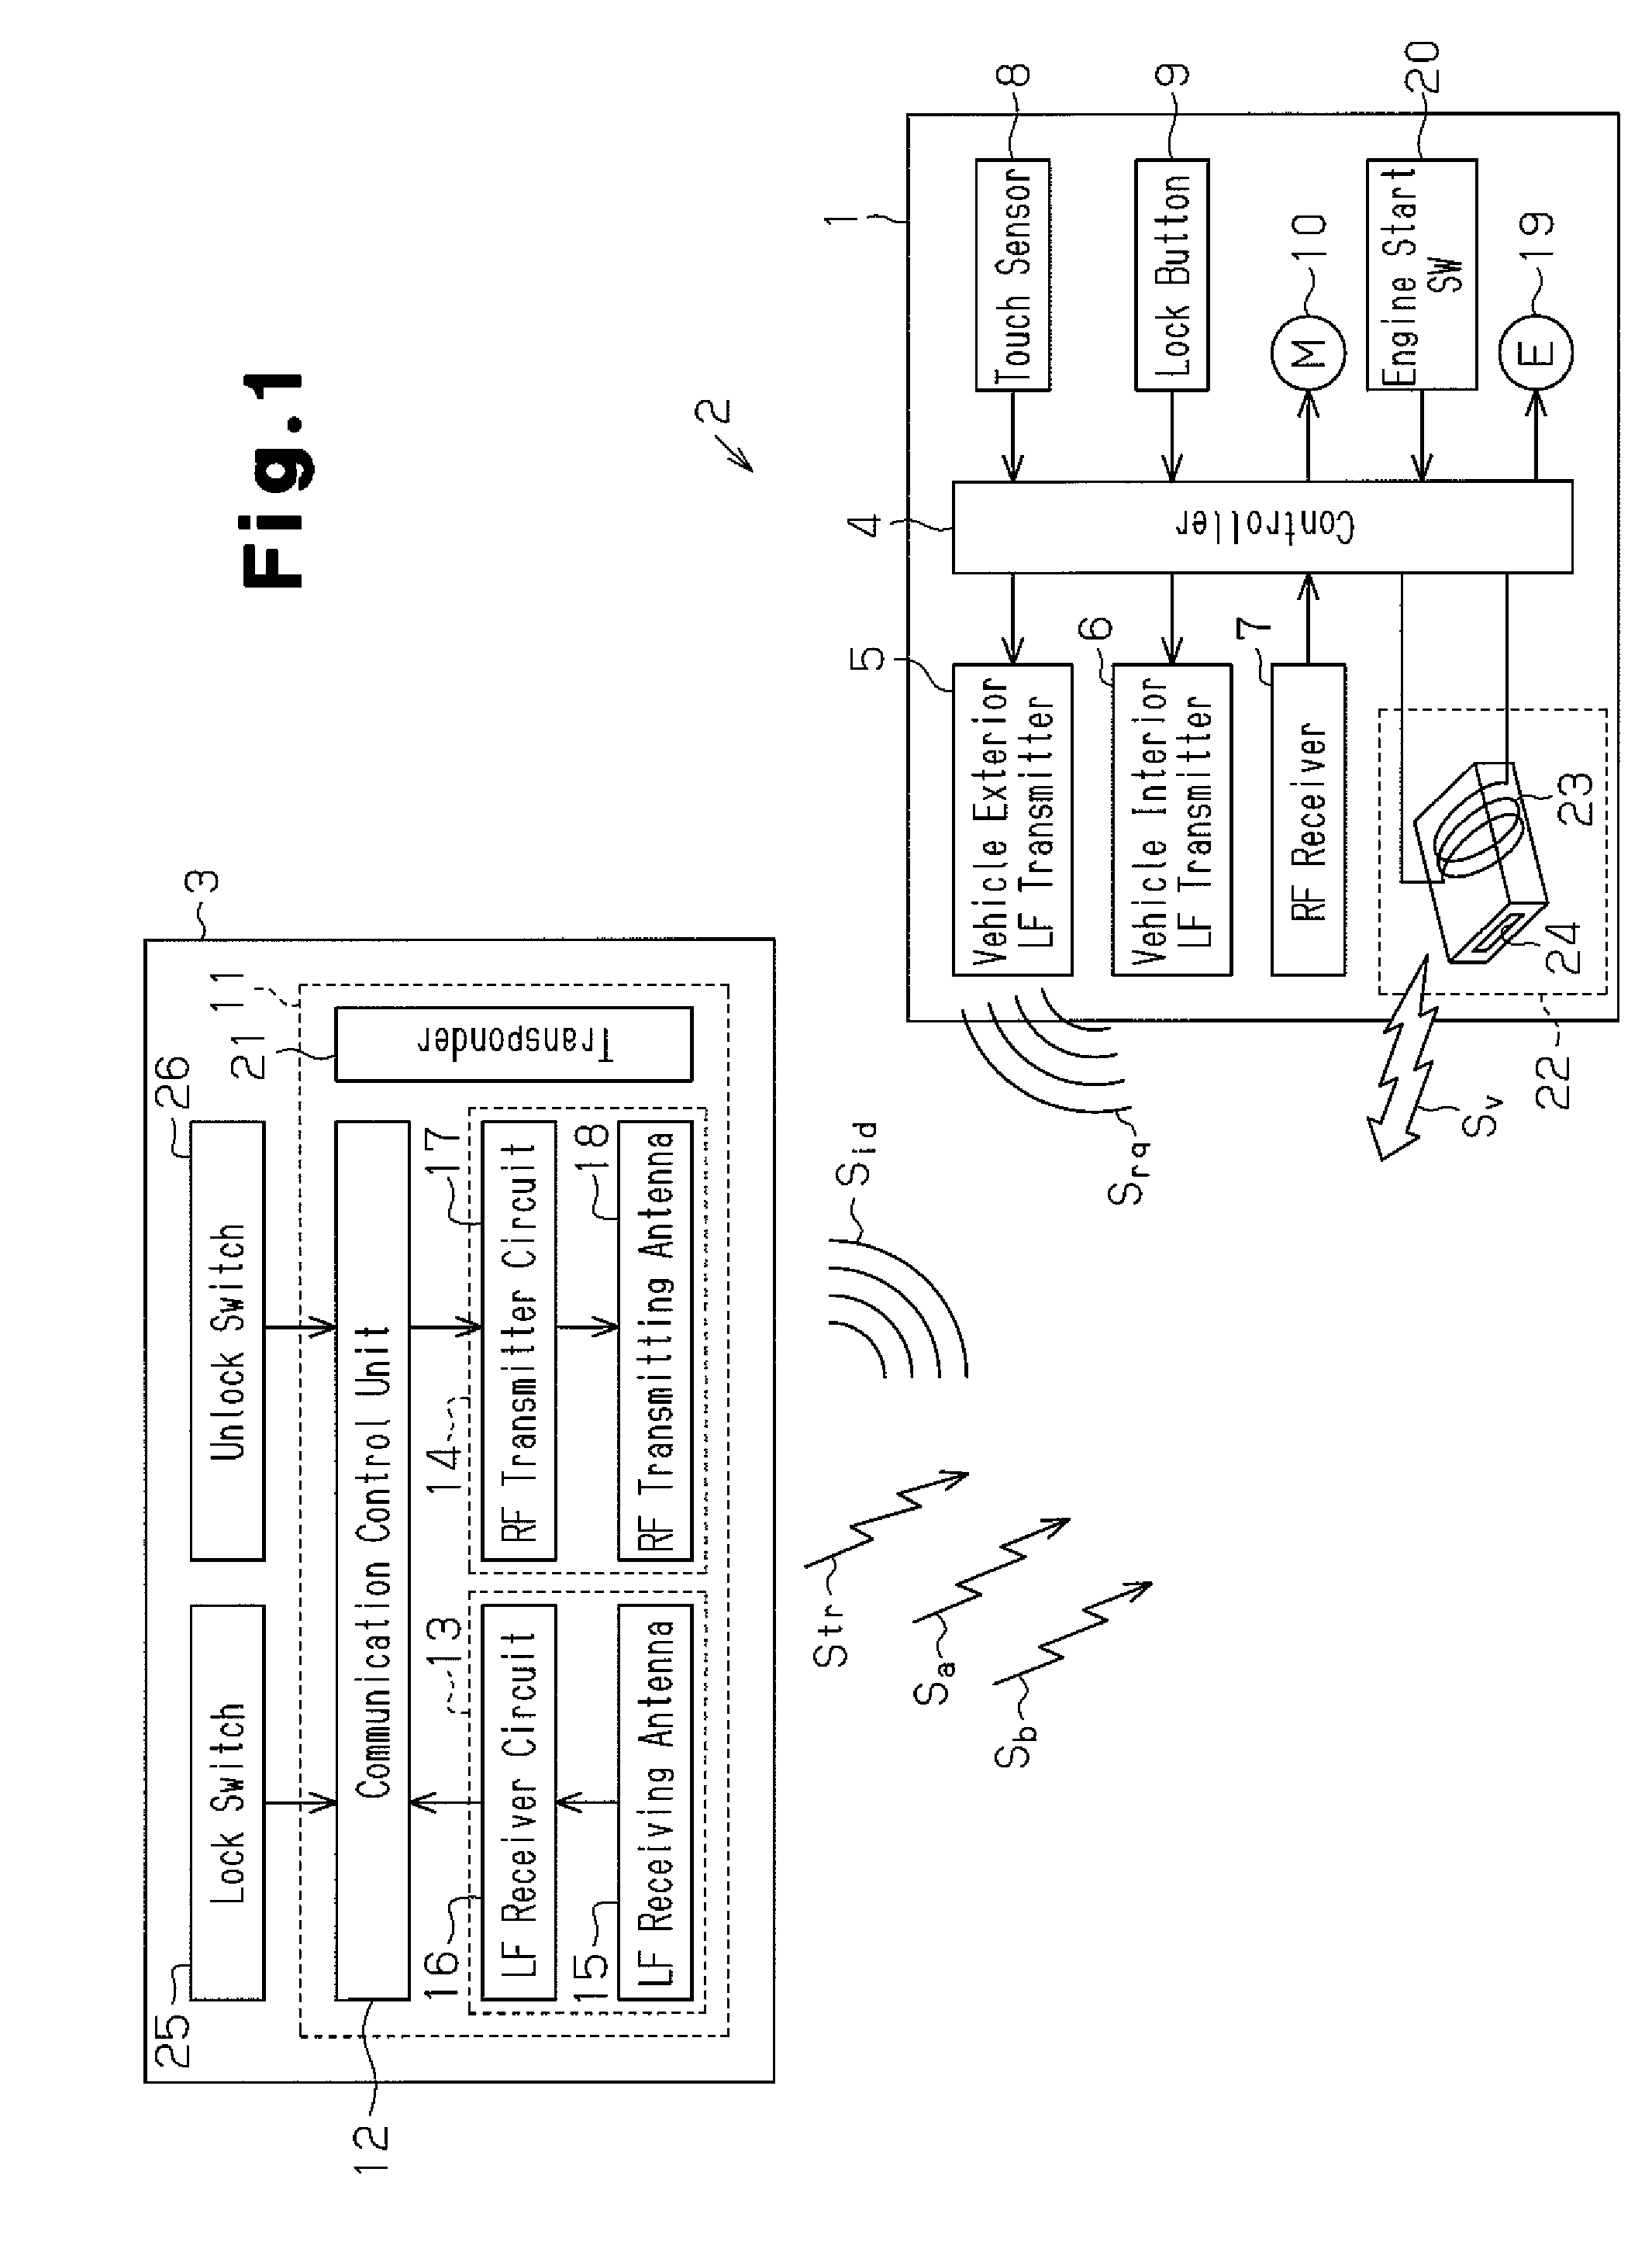 Antenna structure for wireless communication device